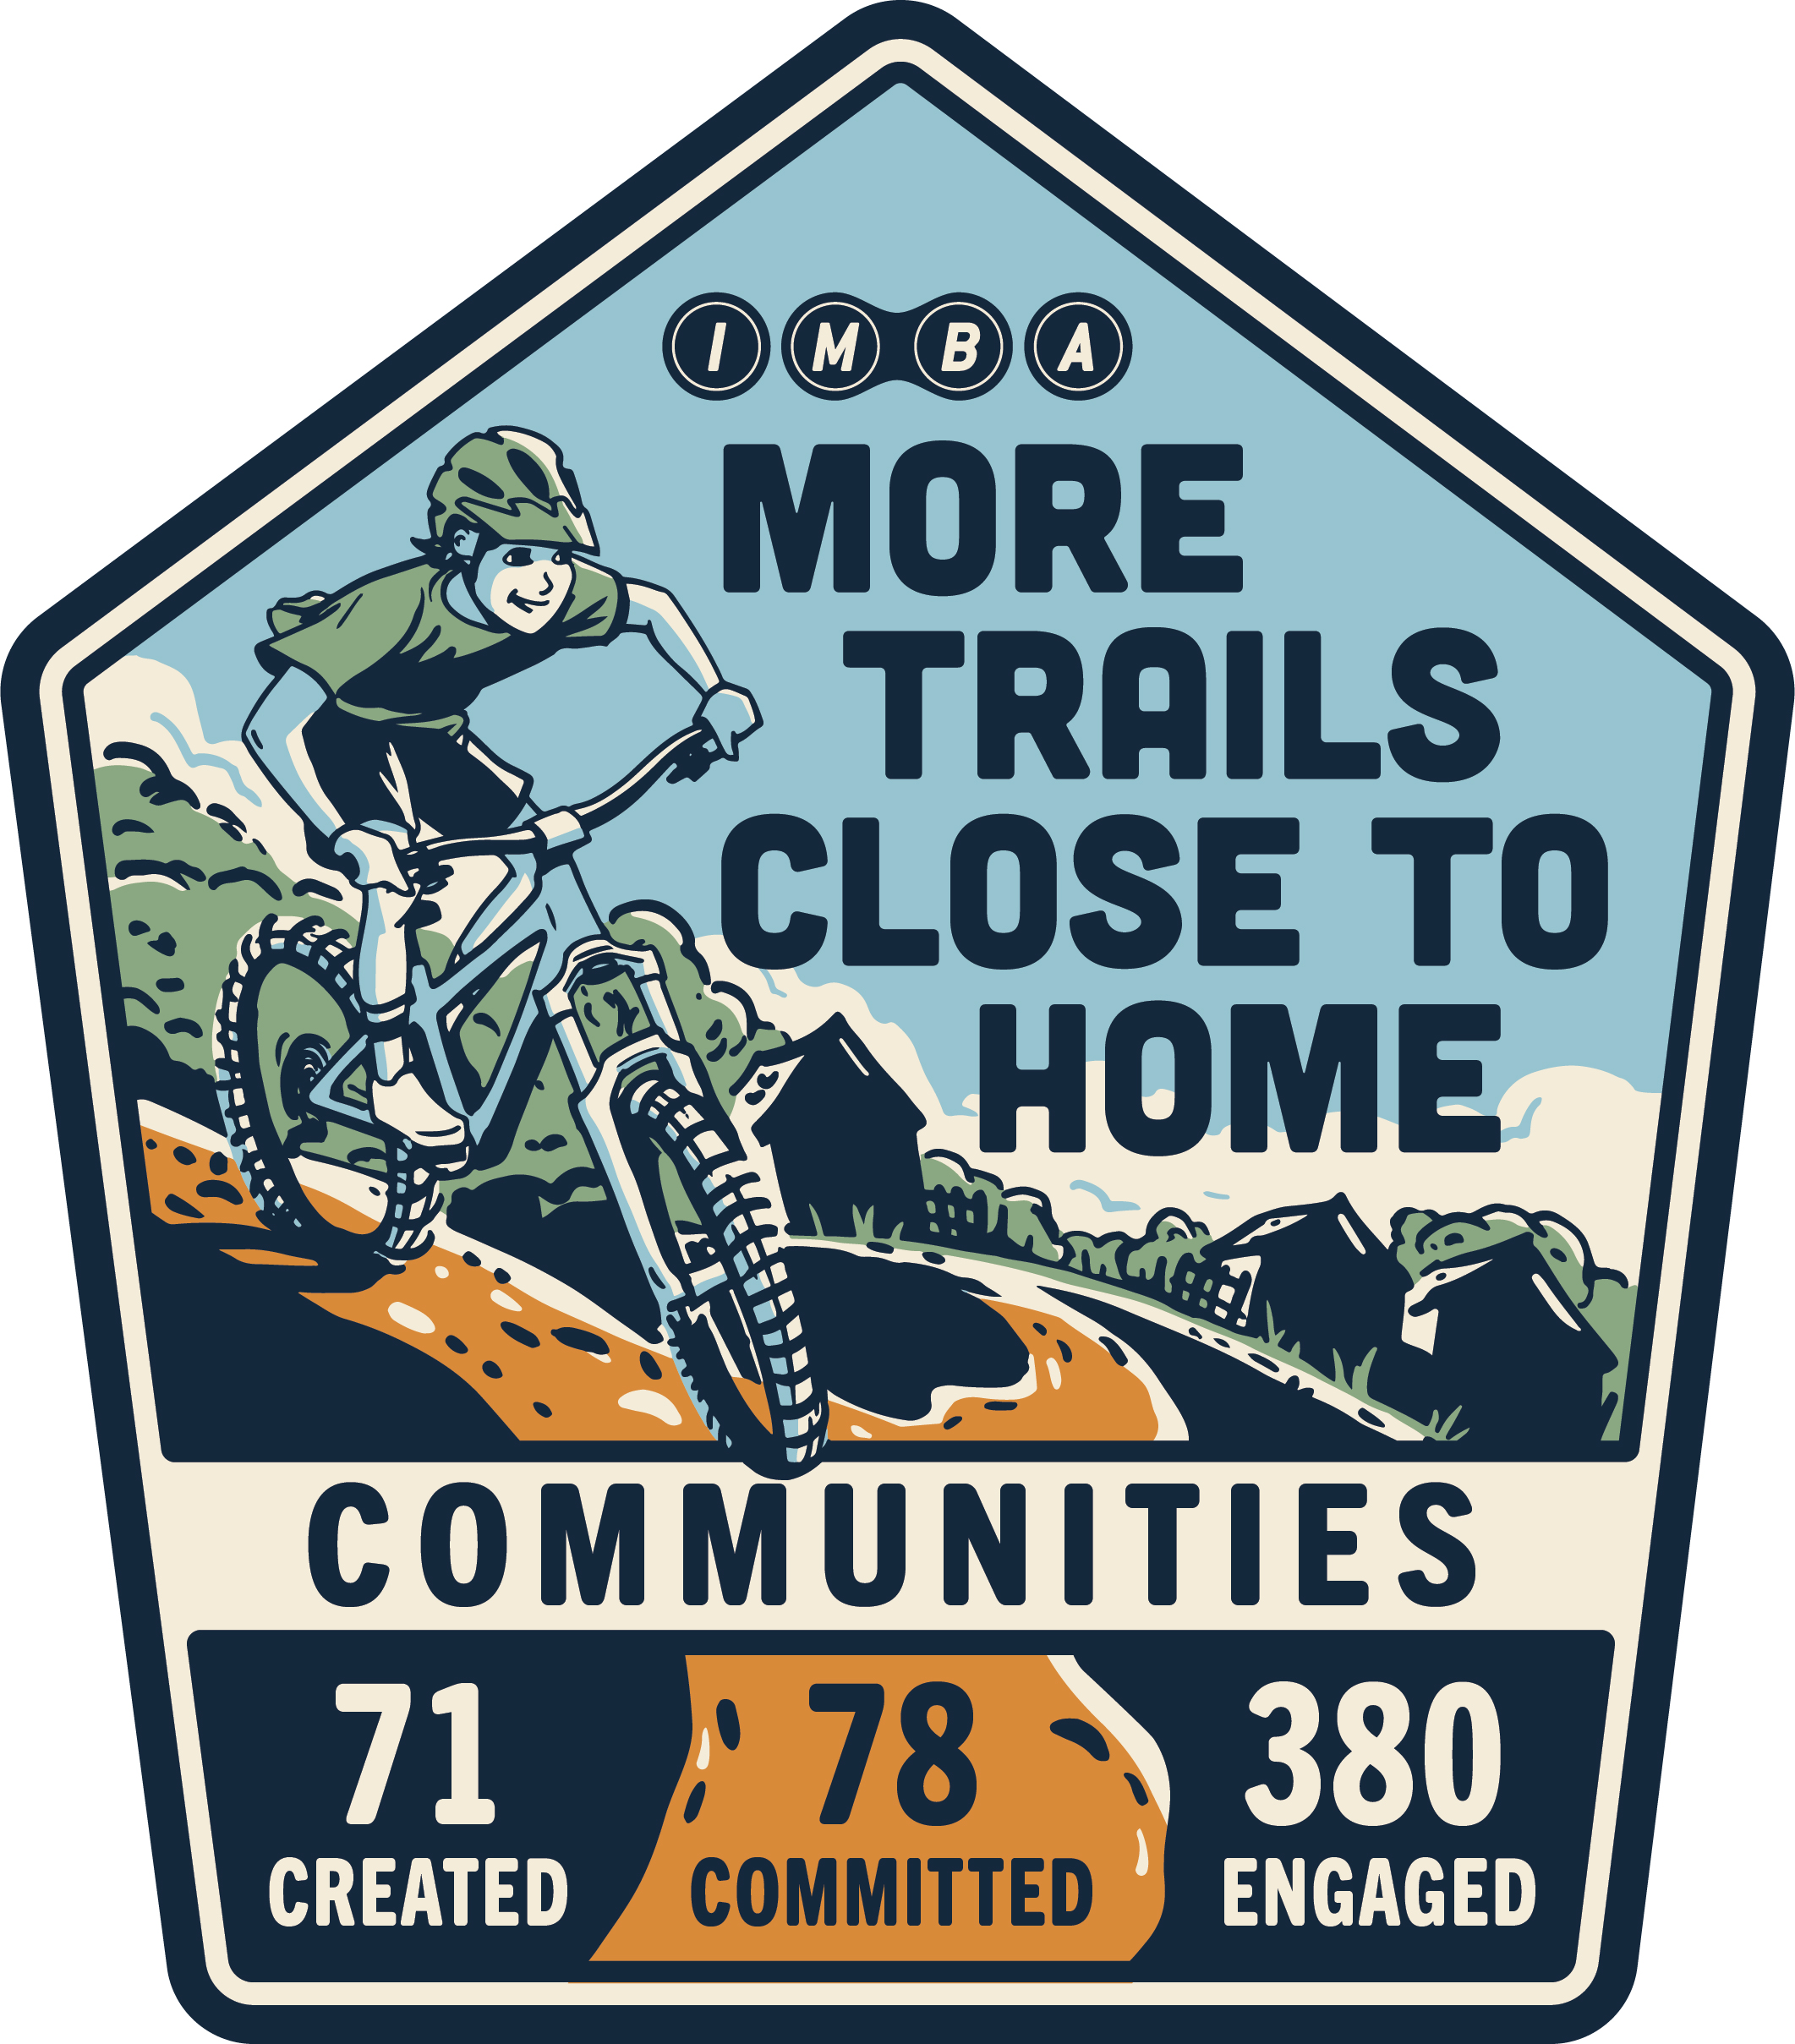 A badge for More Trails Close to Home shows the image of a mountain biker on a trail and notes 71 communities where trails have been created, 78 have committed, and 380 have engaged in the process.